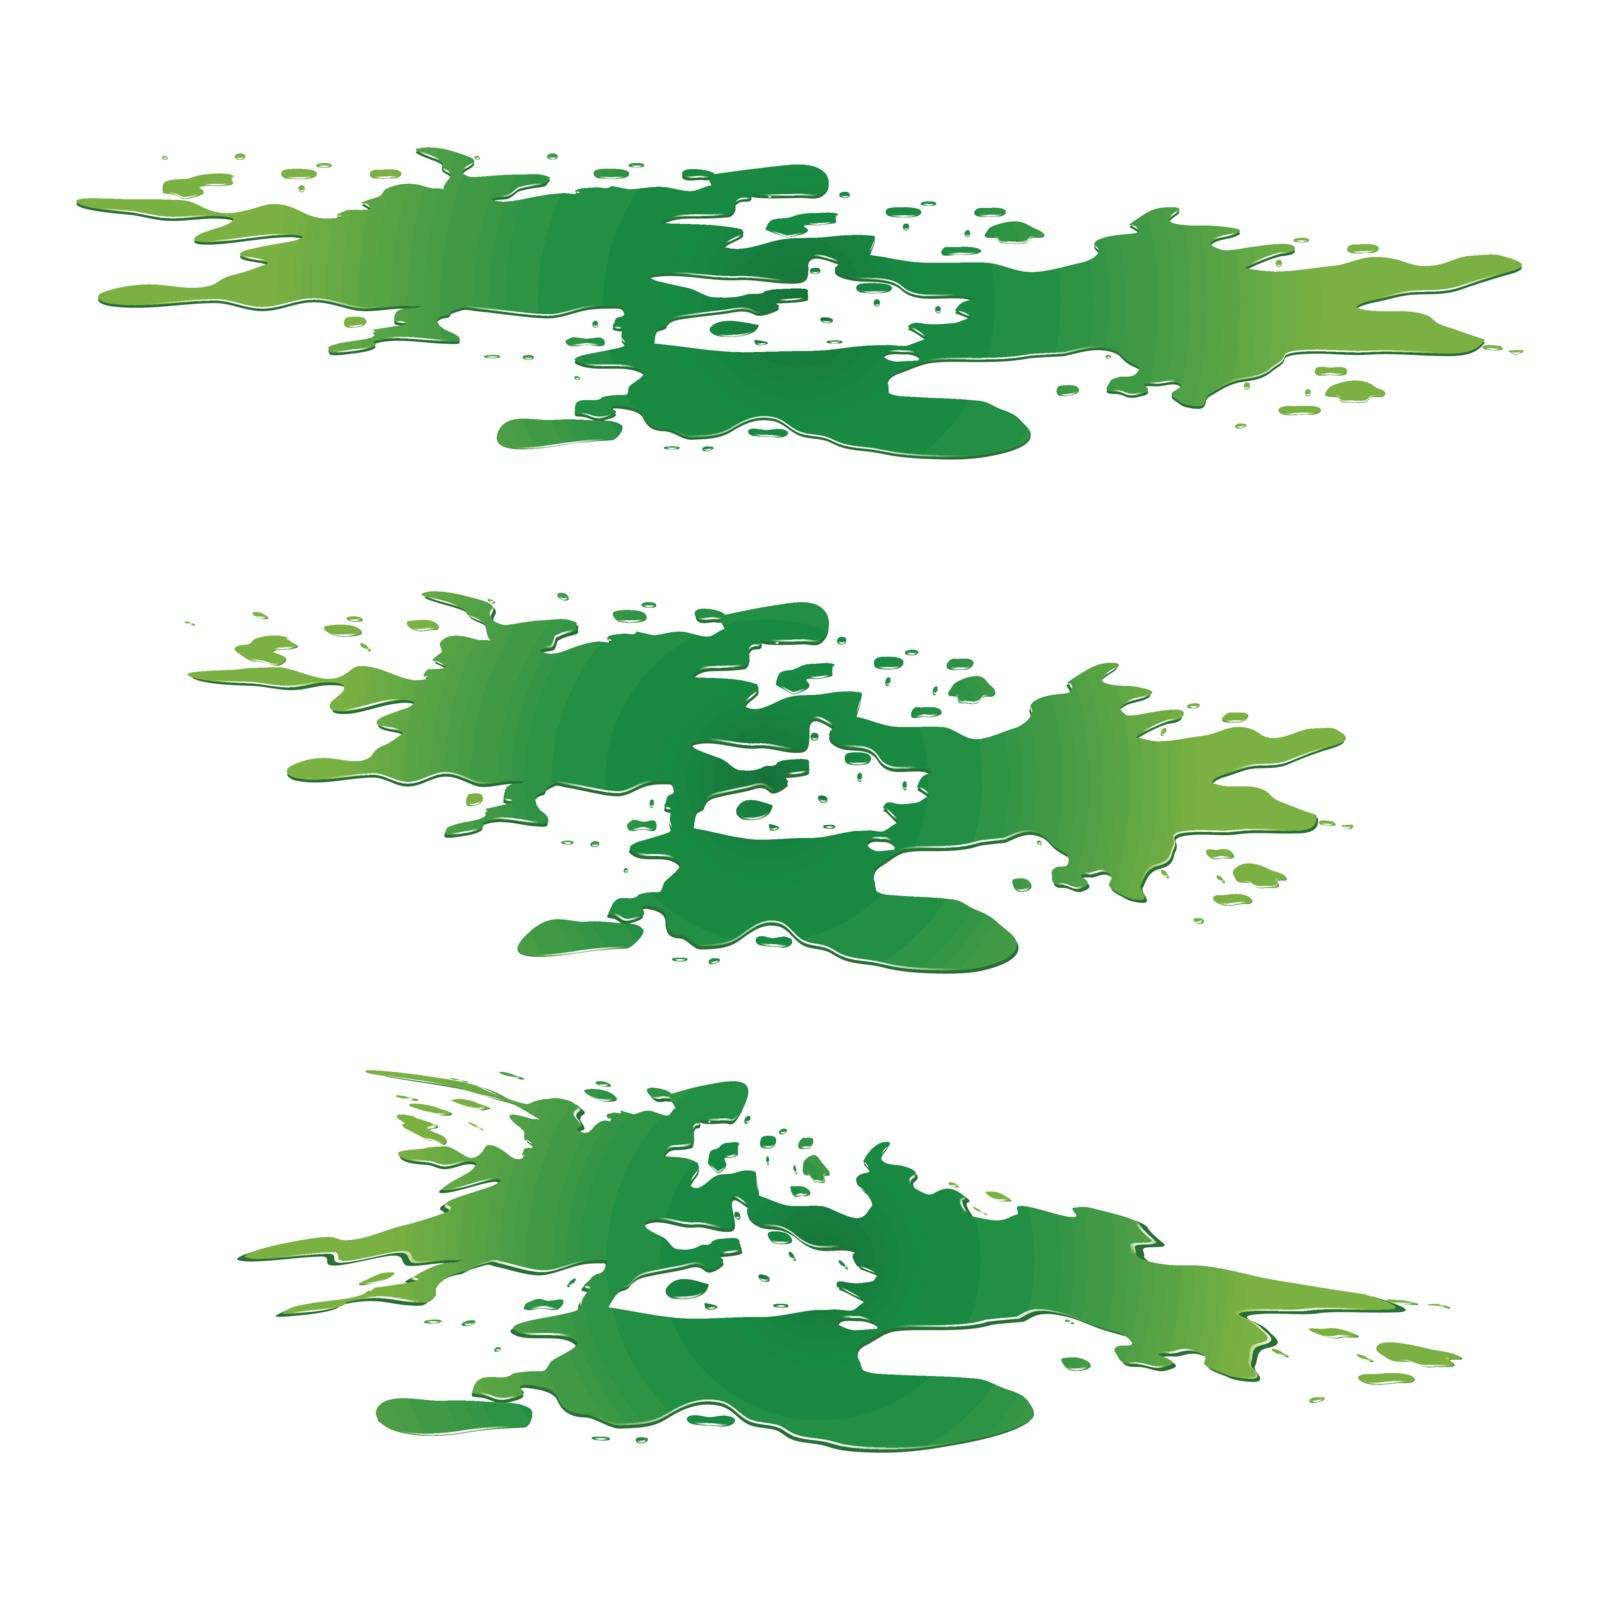 Puddle of toxic substance spill. Green chemical stain, plash, drop. Vector illustration isolated on the white background